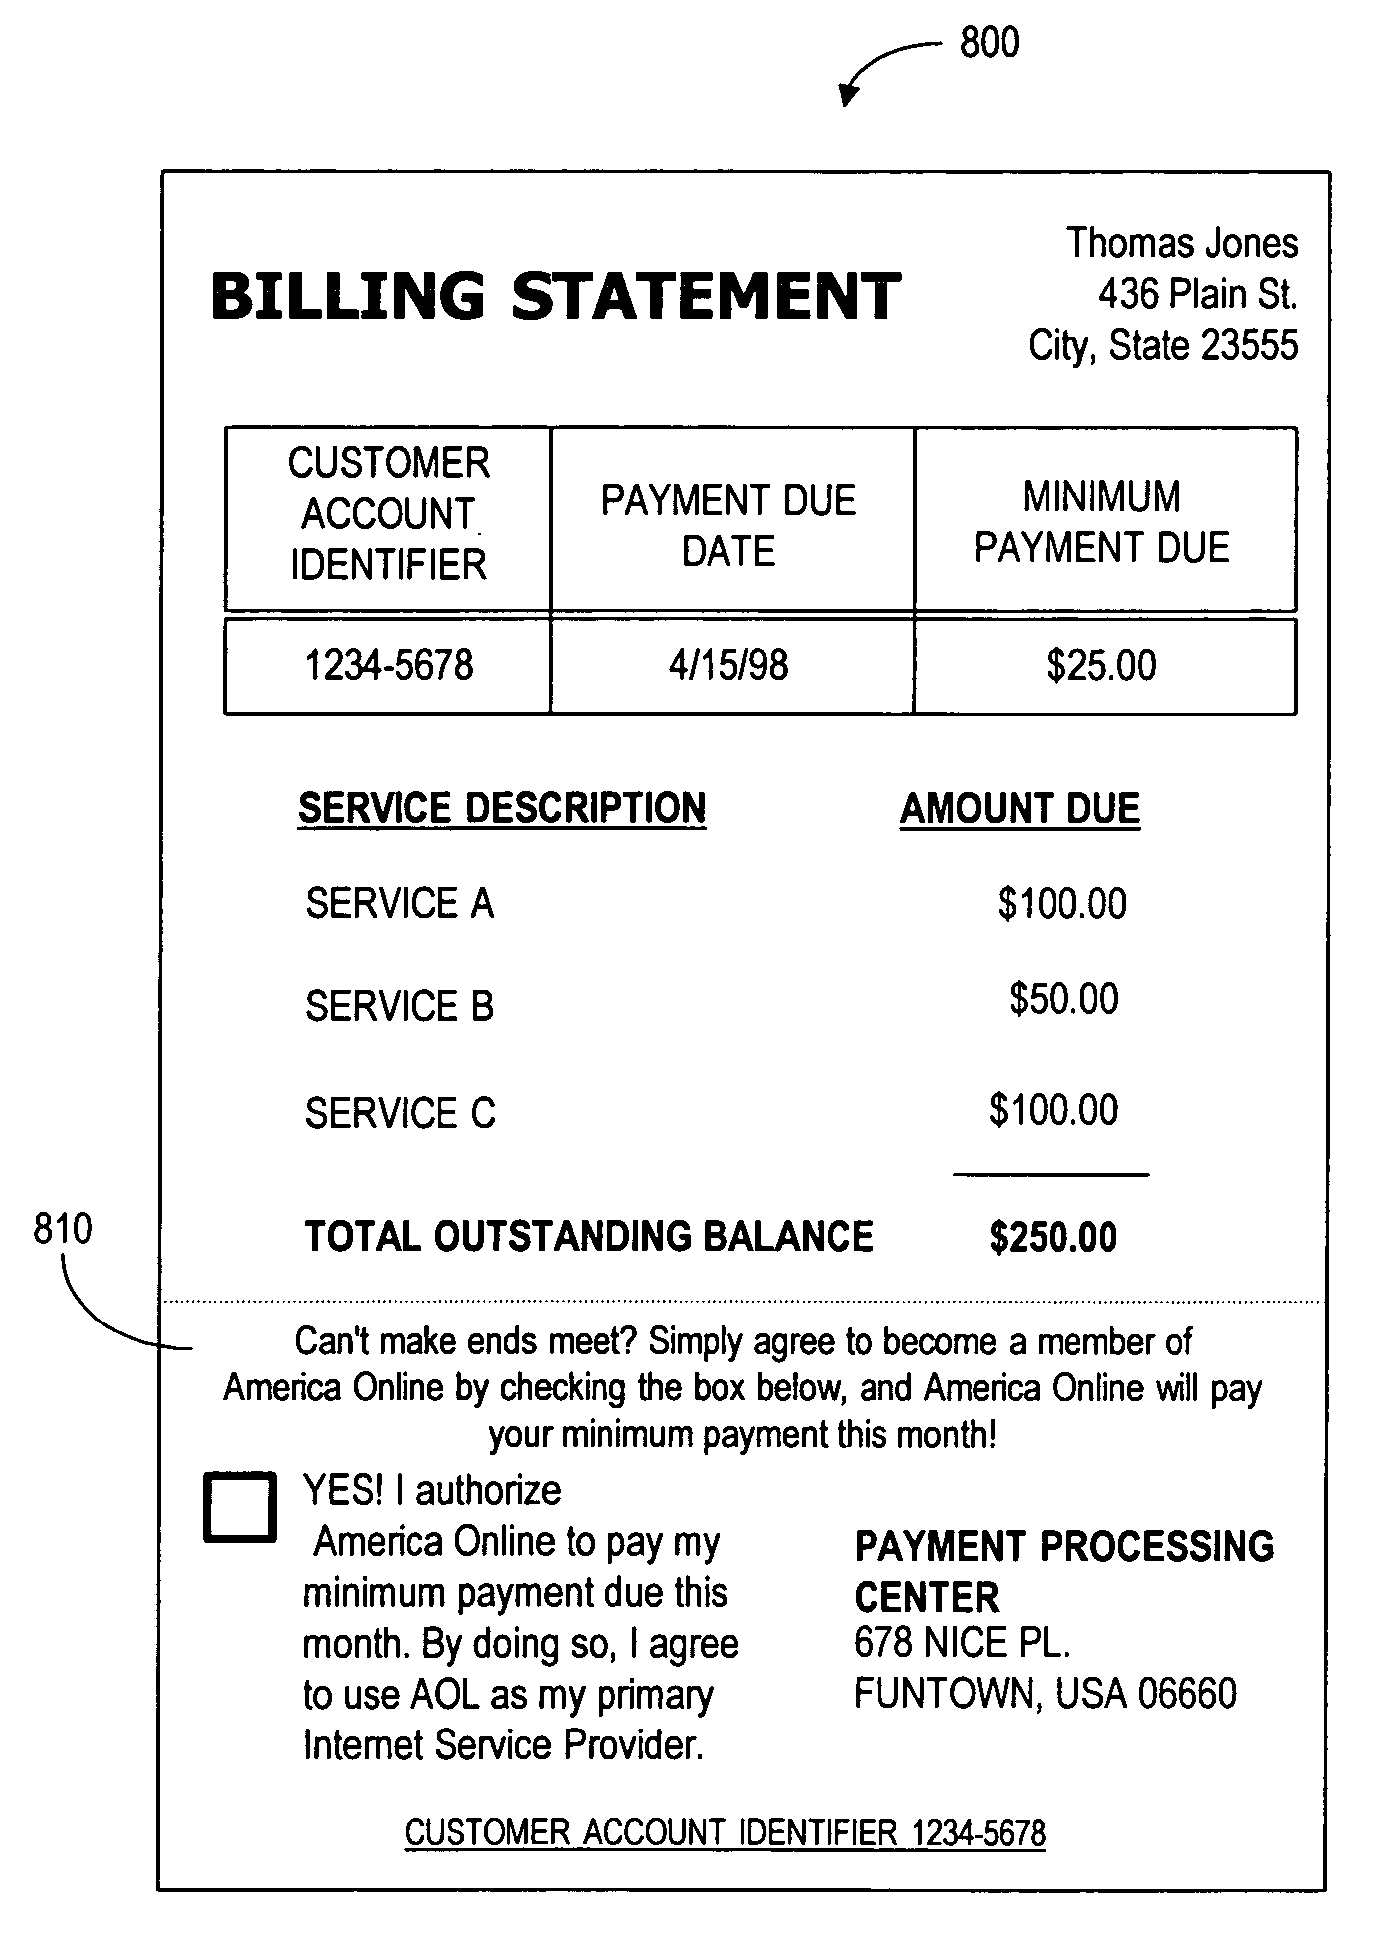 Billing statement customer acquisition system